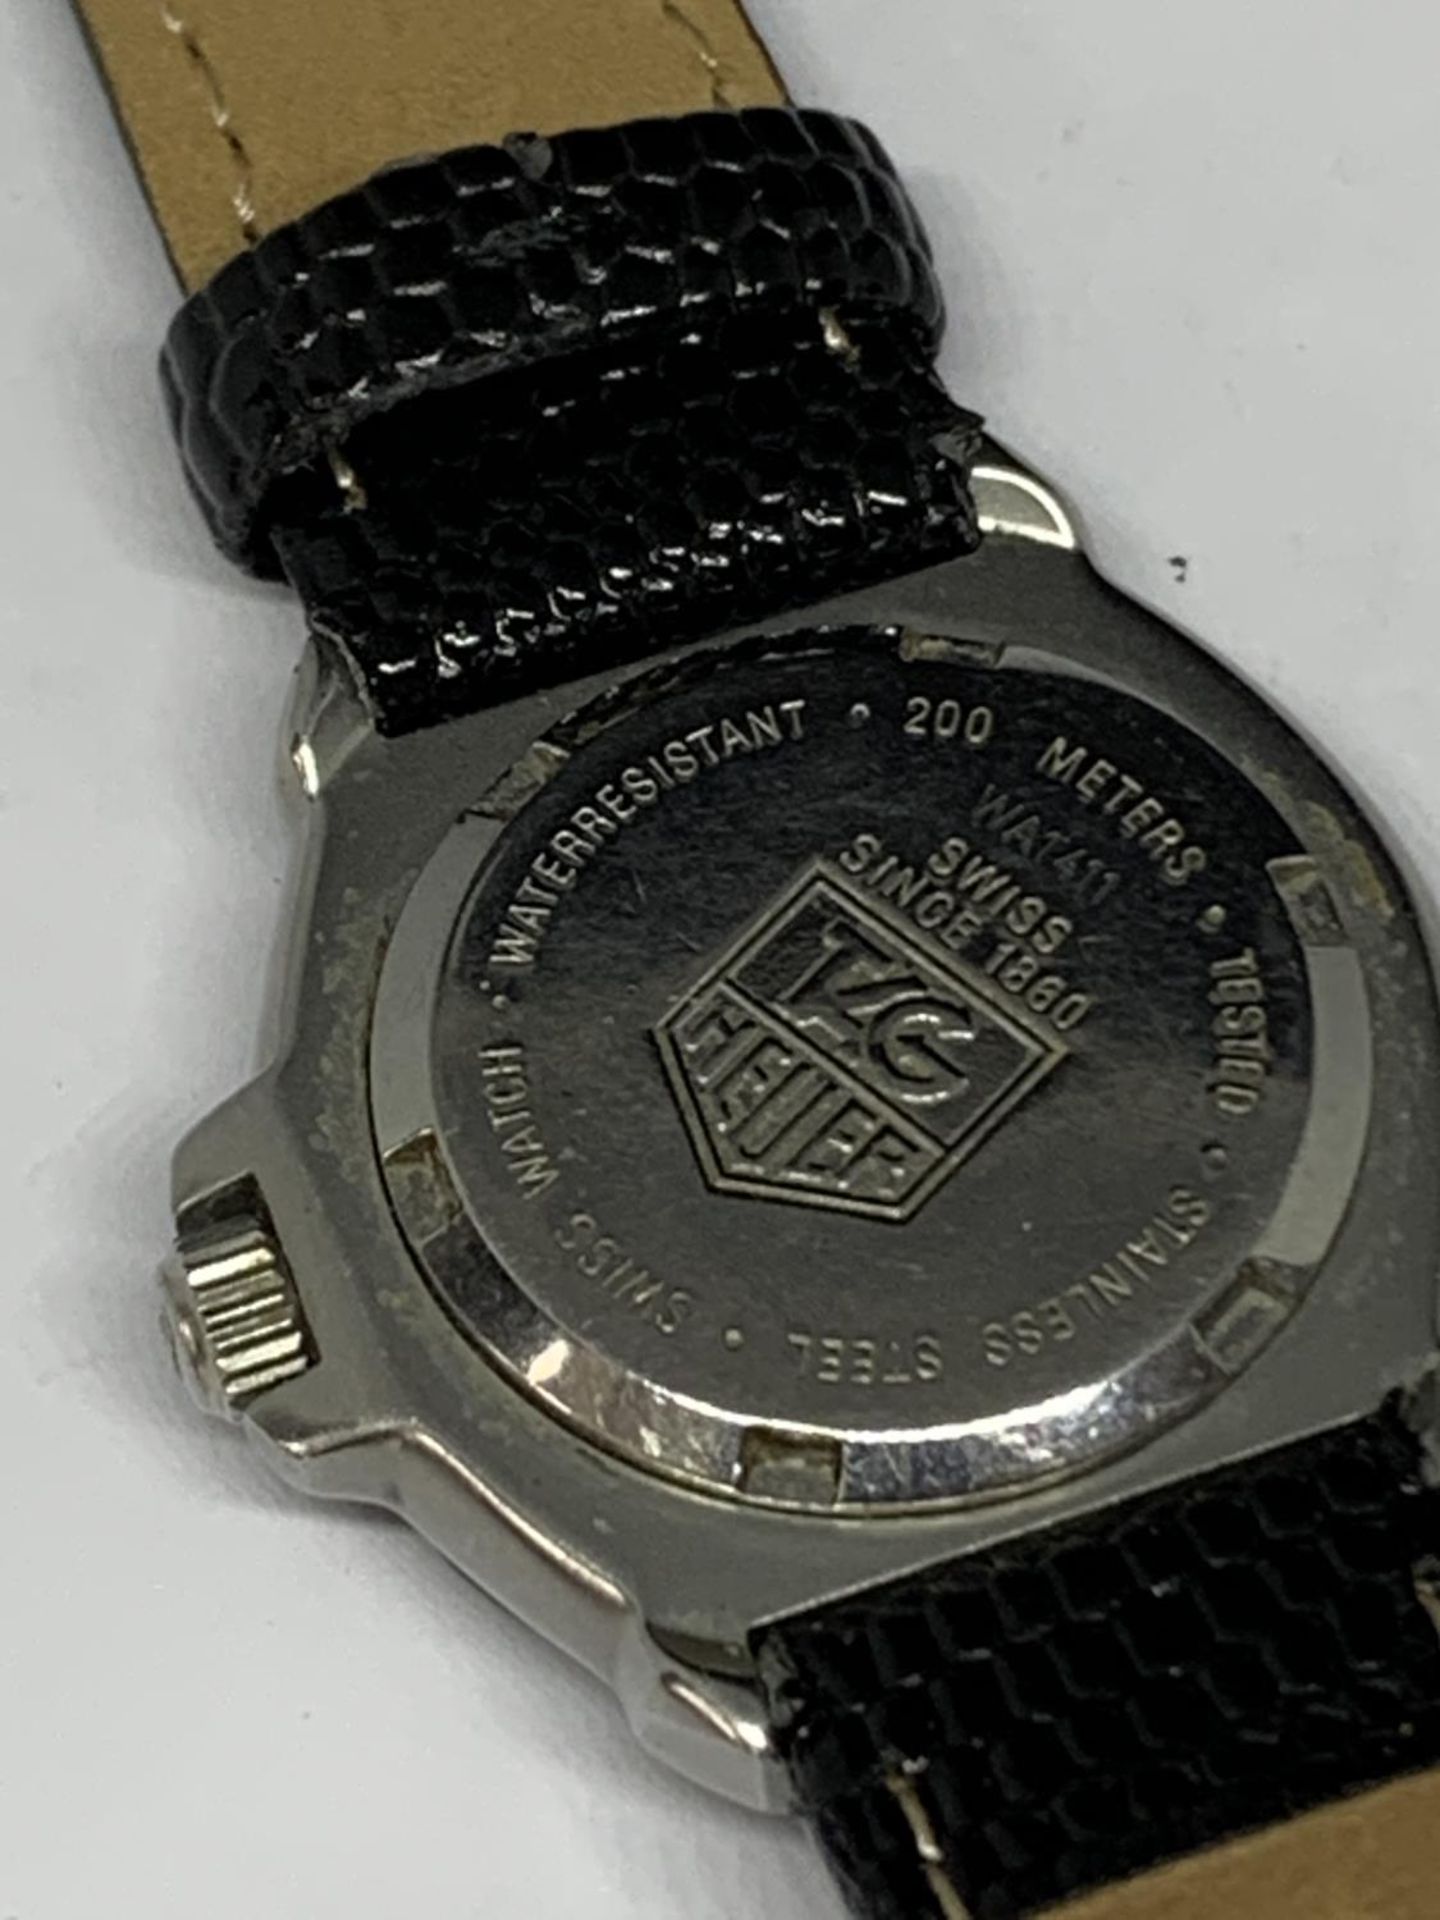 A VINTAGE TAG HEUER FORMULA I WRIST WATCH SEEN WORKING BUT NO WARRANTY - Image 3 of 3